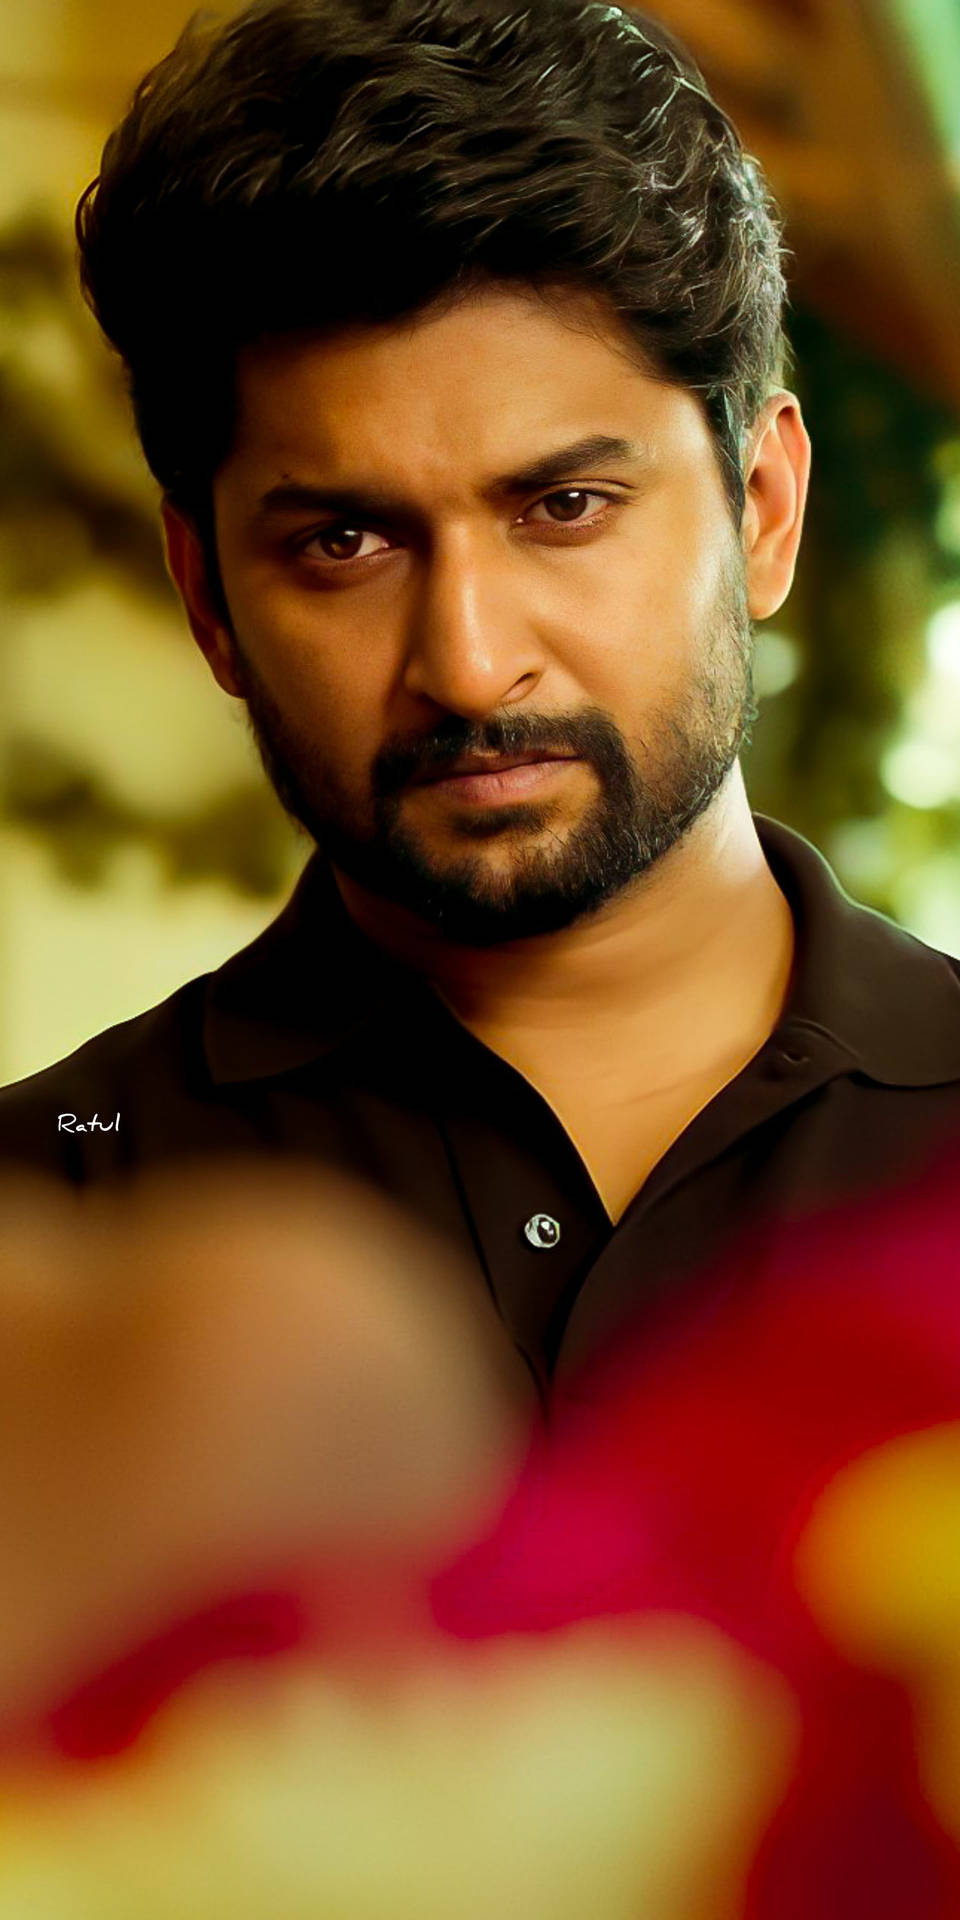 Mesmerizing Serious Look Of Actor Nani Background